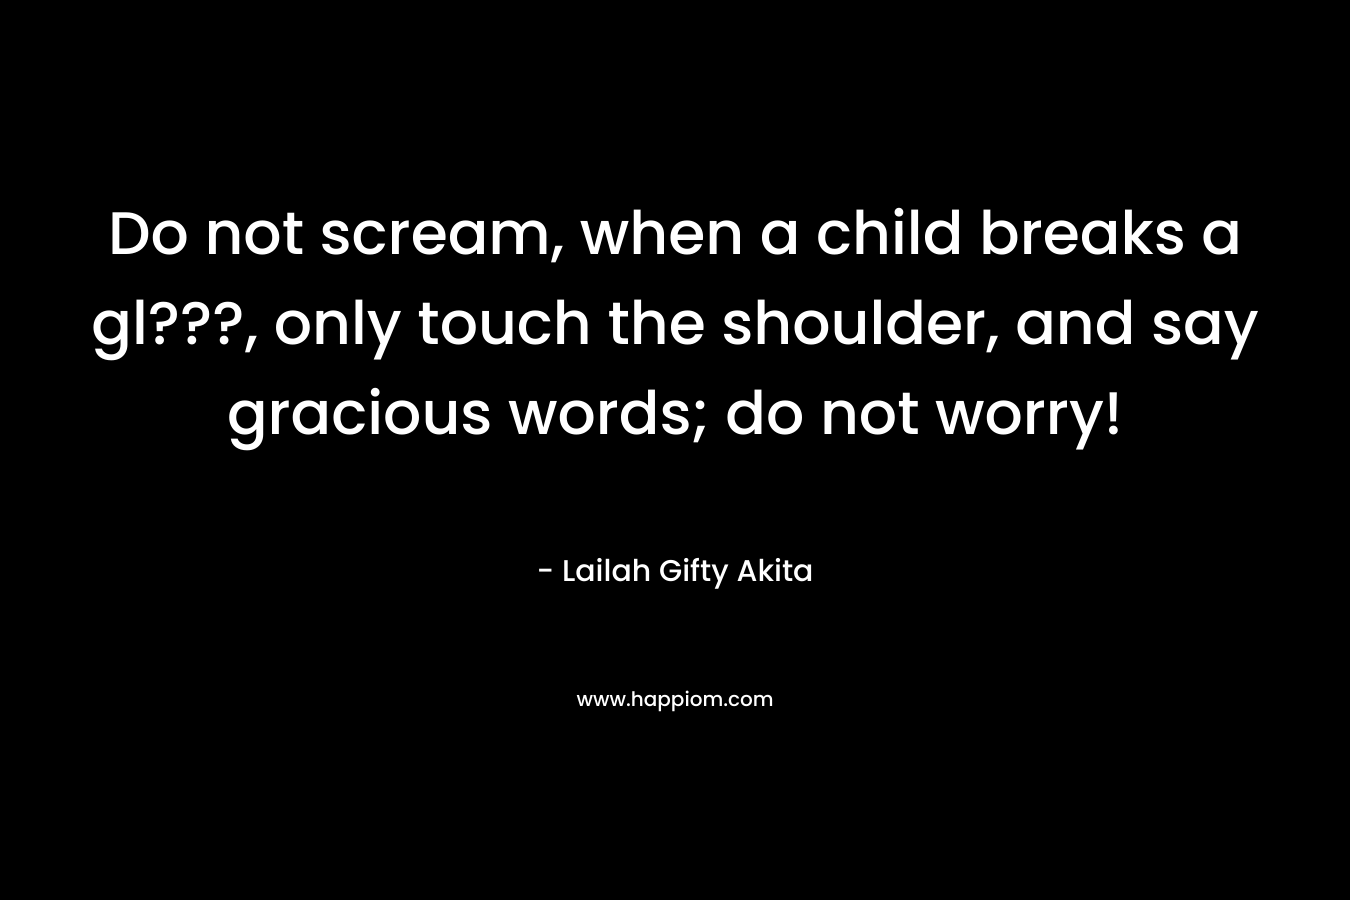 Do not scream, when a child breaks a gl???, only touch the shoulder, and say gracious words; do not worry! – Lailah Gifty Akita